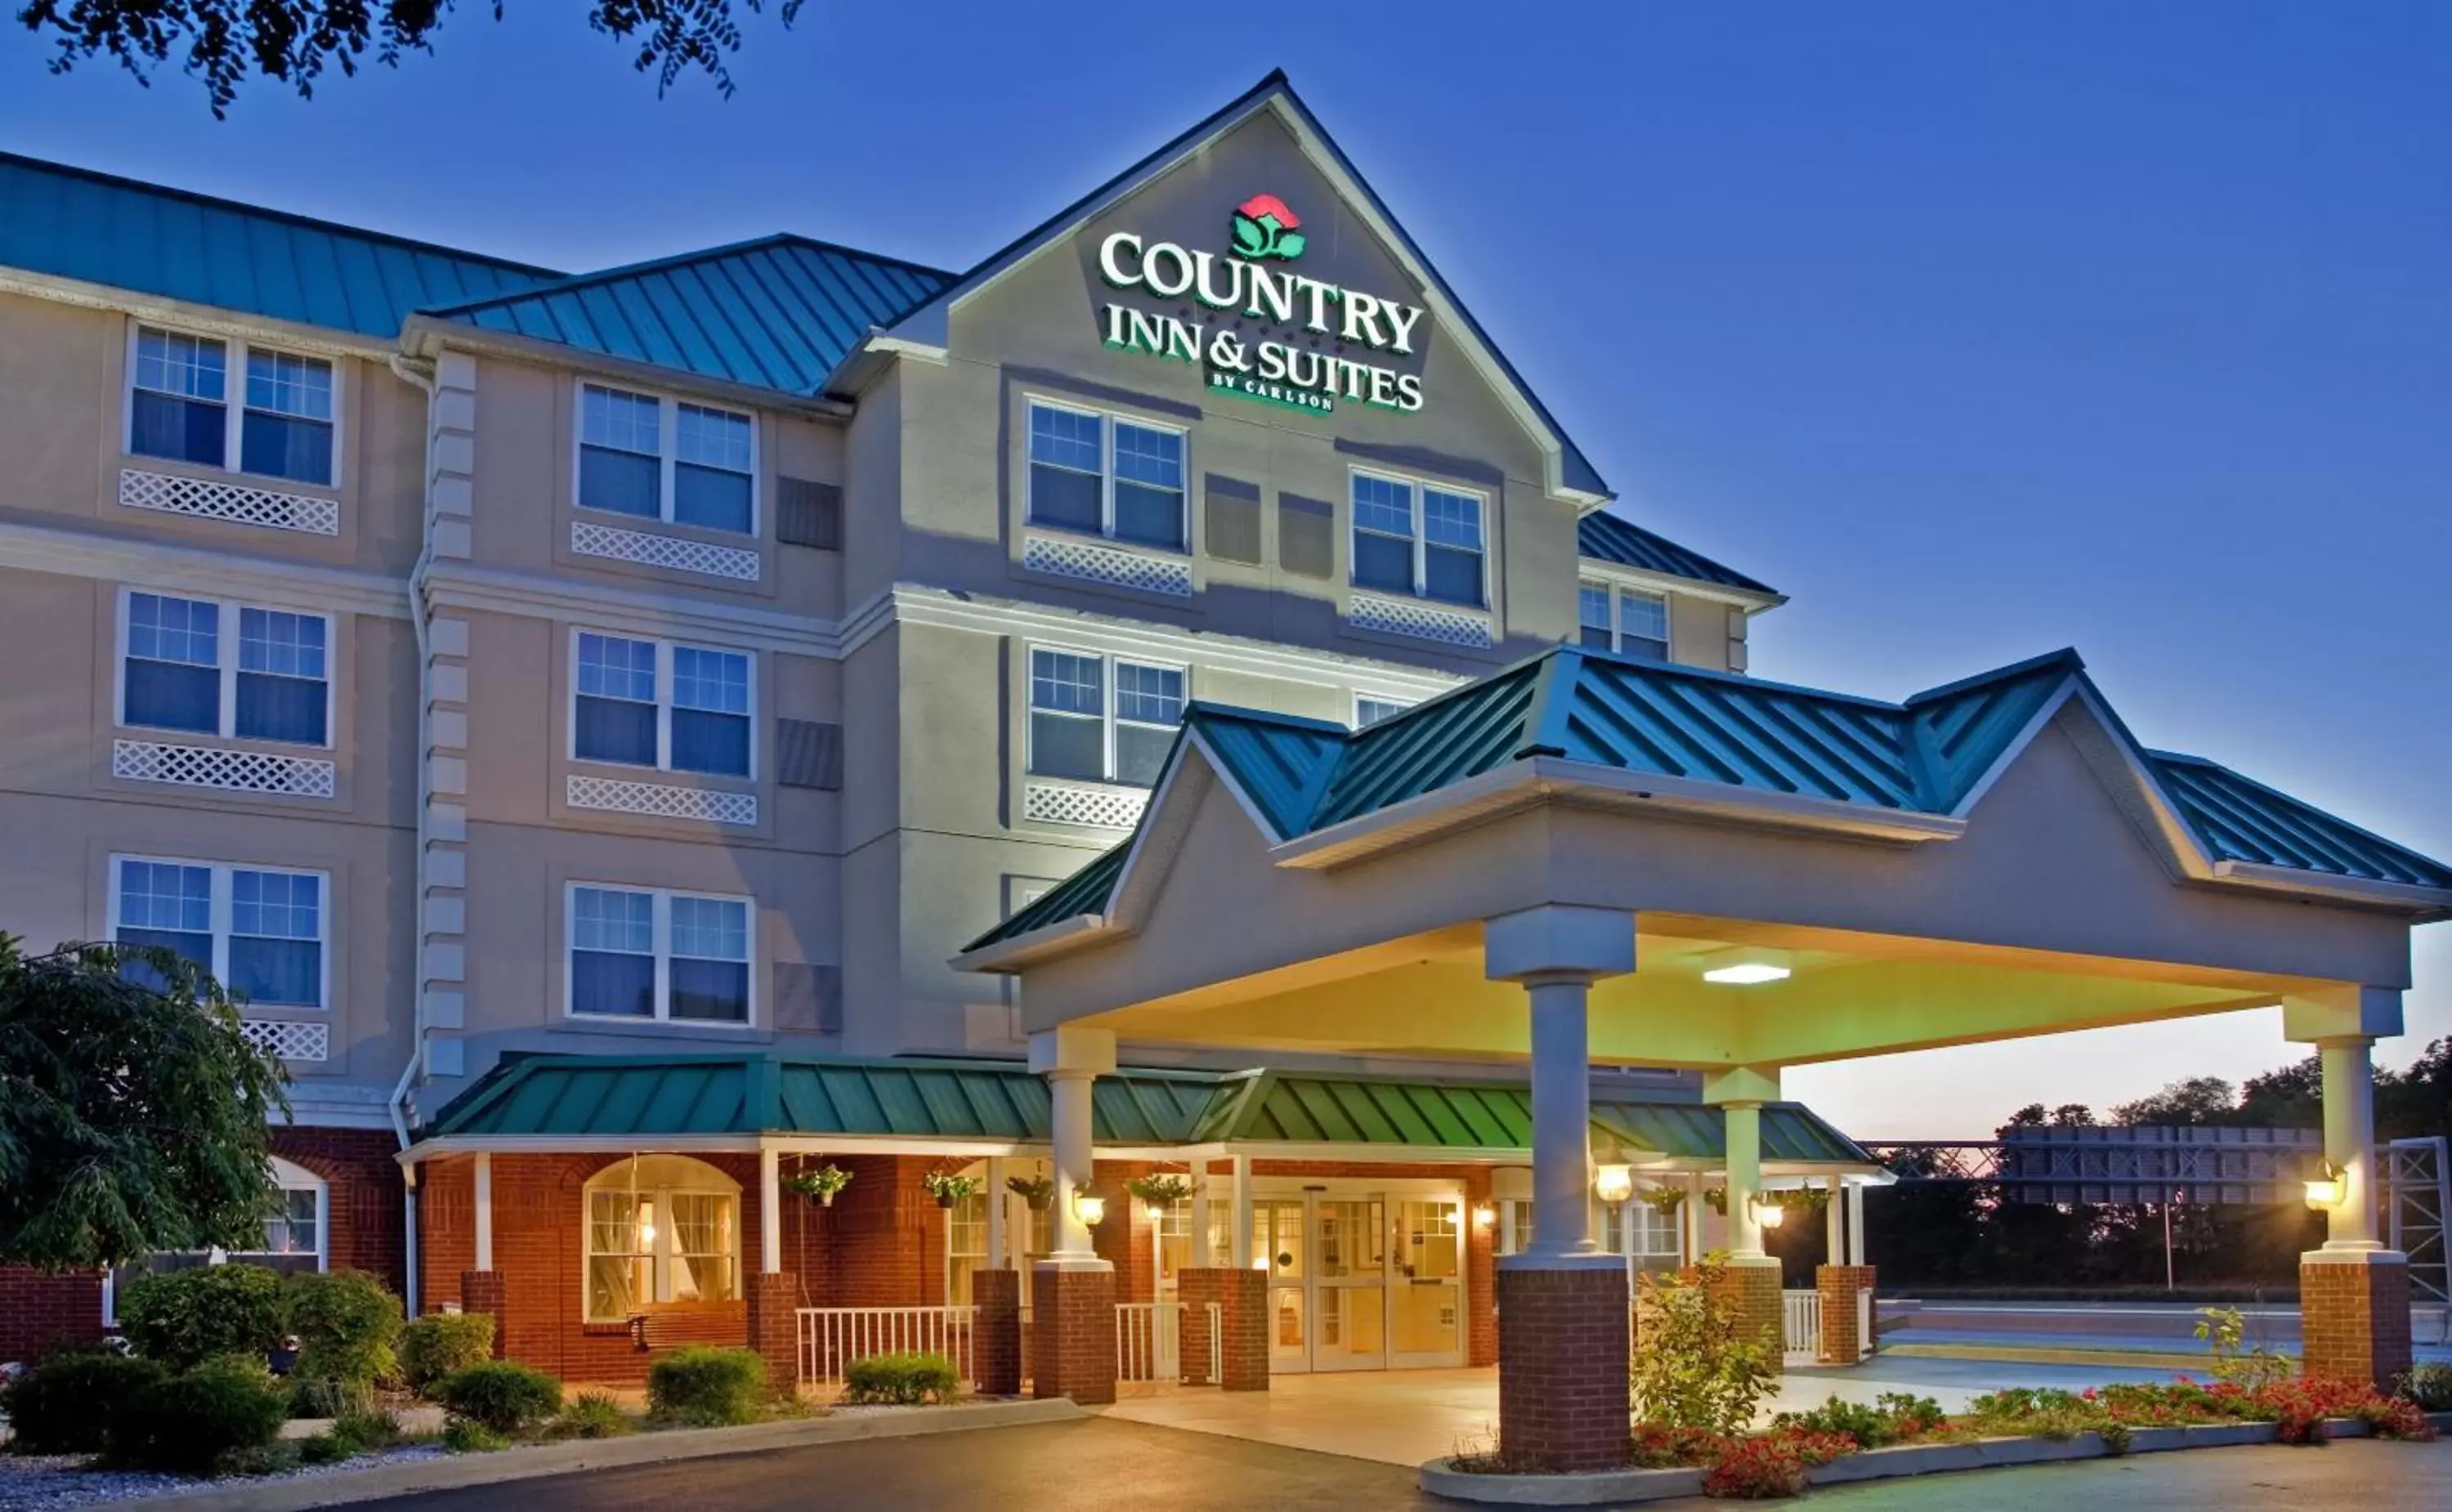 Property Building in Country Inn & Suites by Radisson, Louisville East, KY